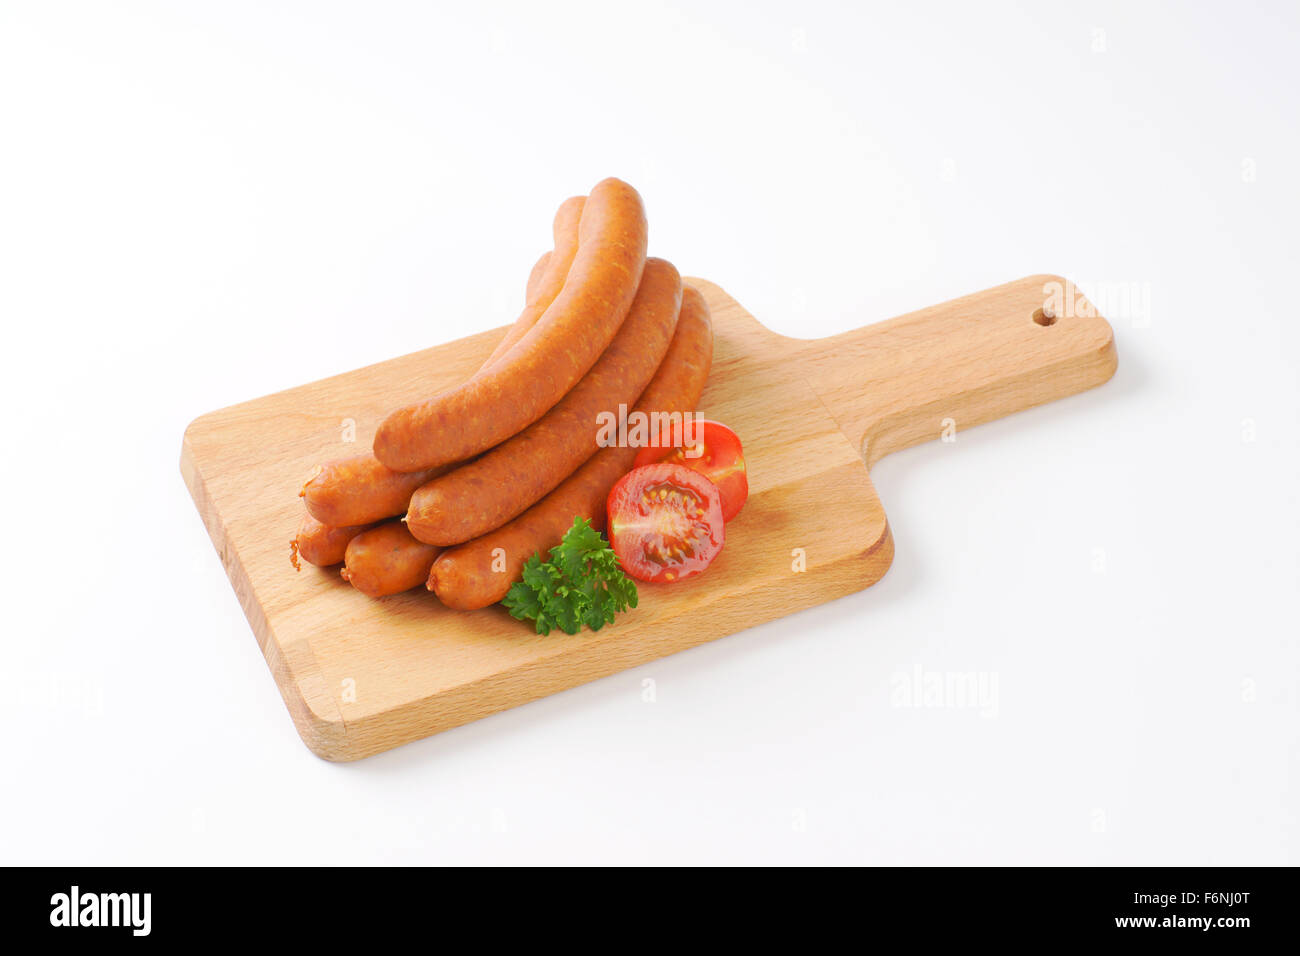 raw frankfurter sausages on wooden cutting board Stock Photo